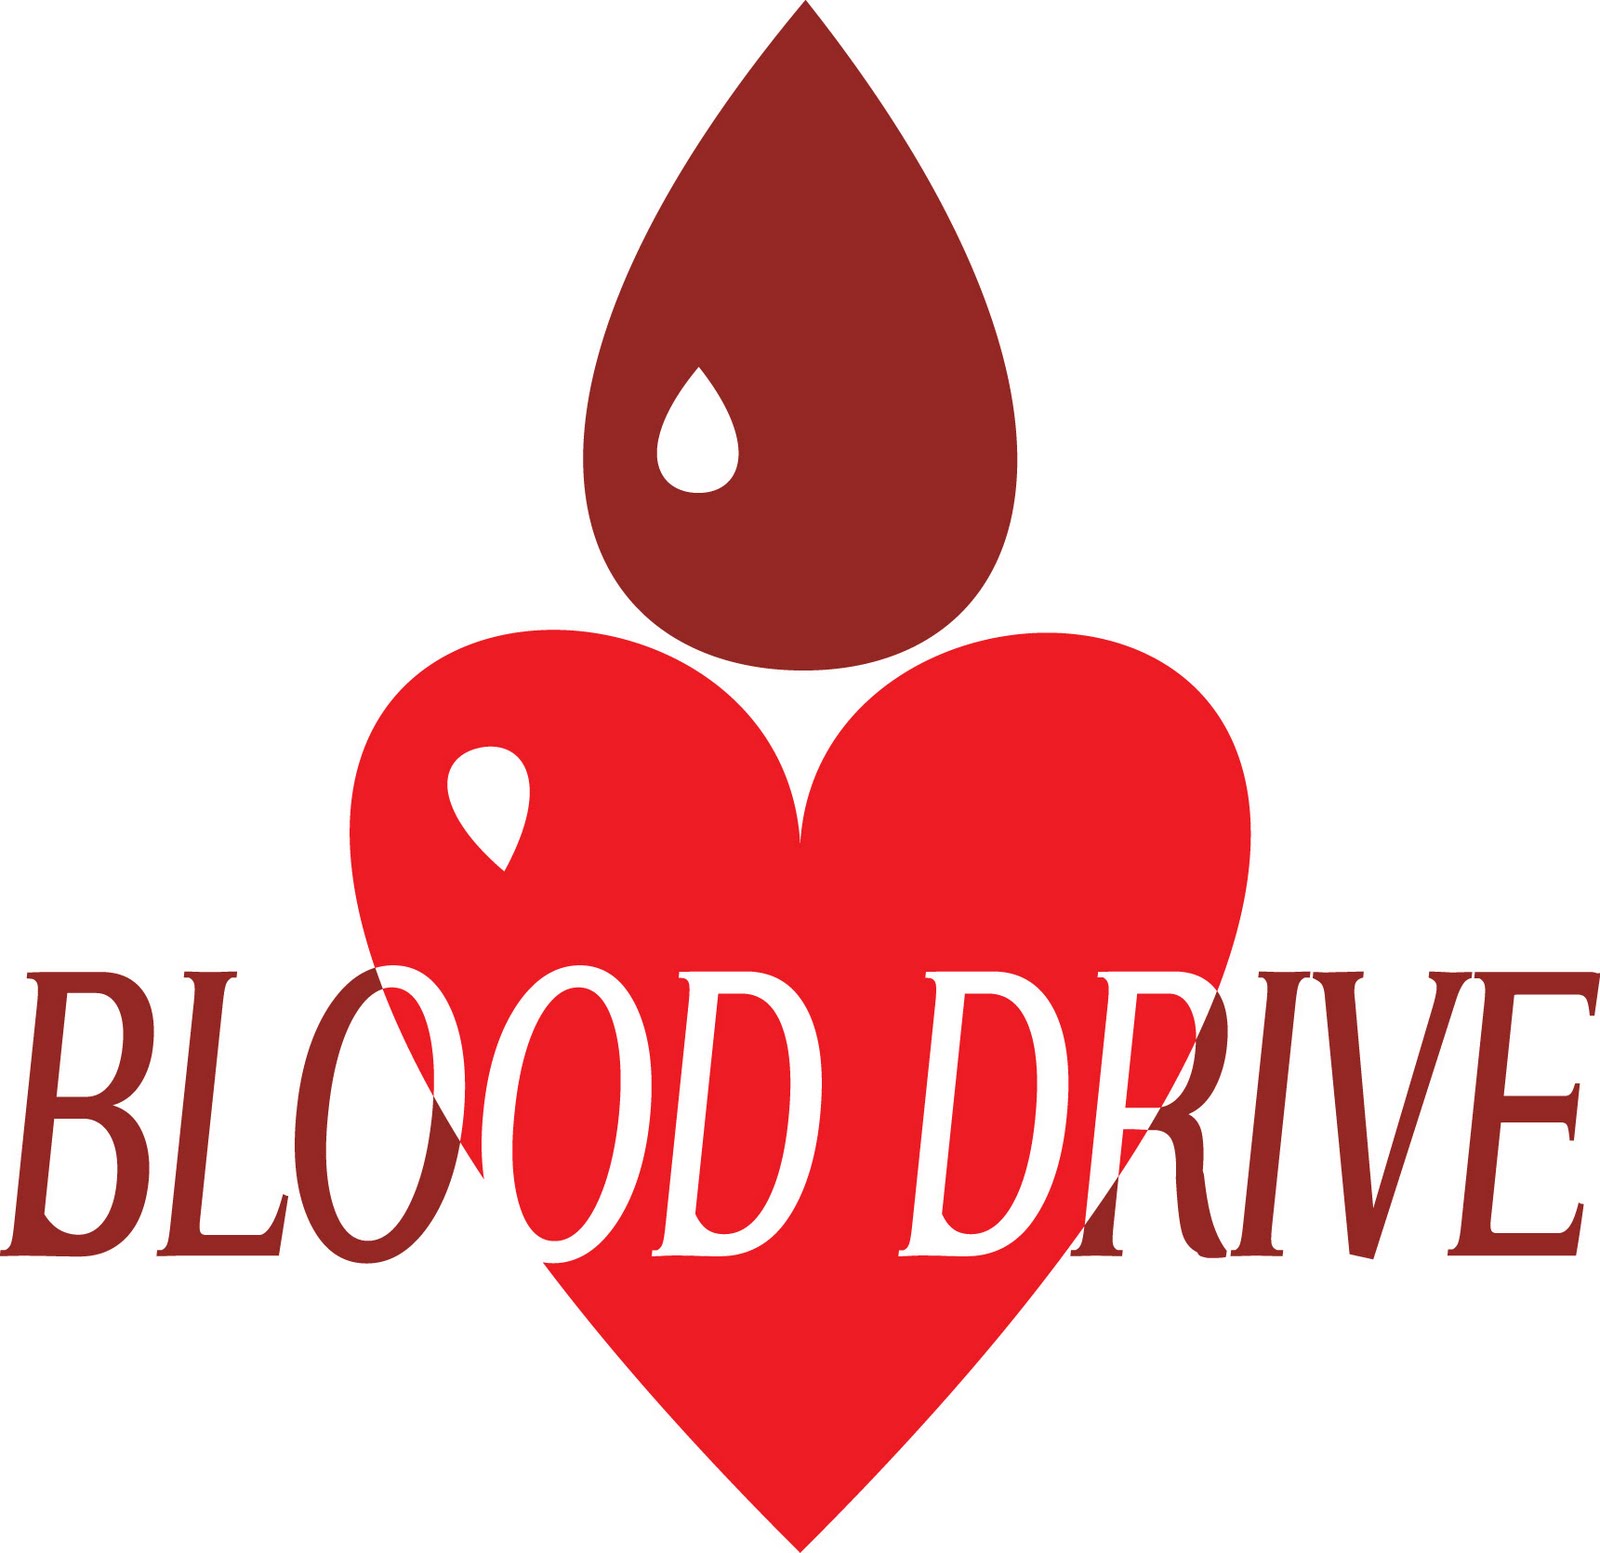 Blood clipart blood drive. Free donation download clip